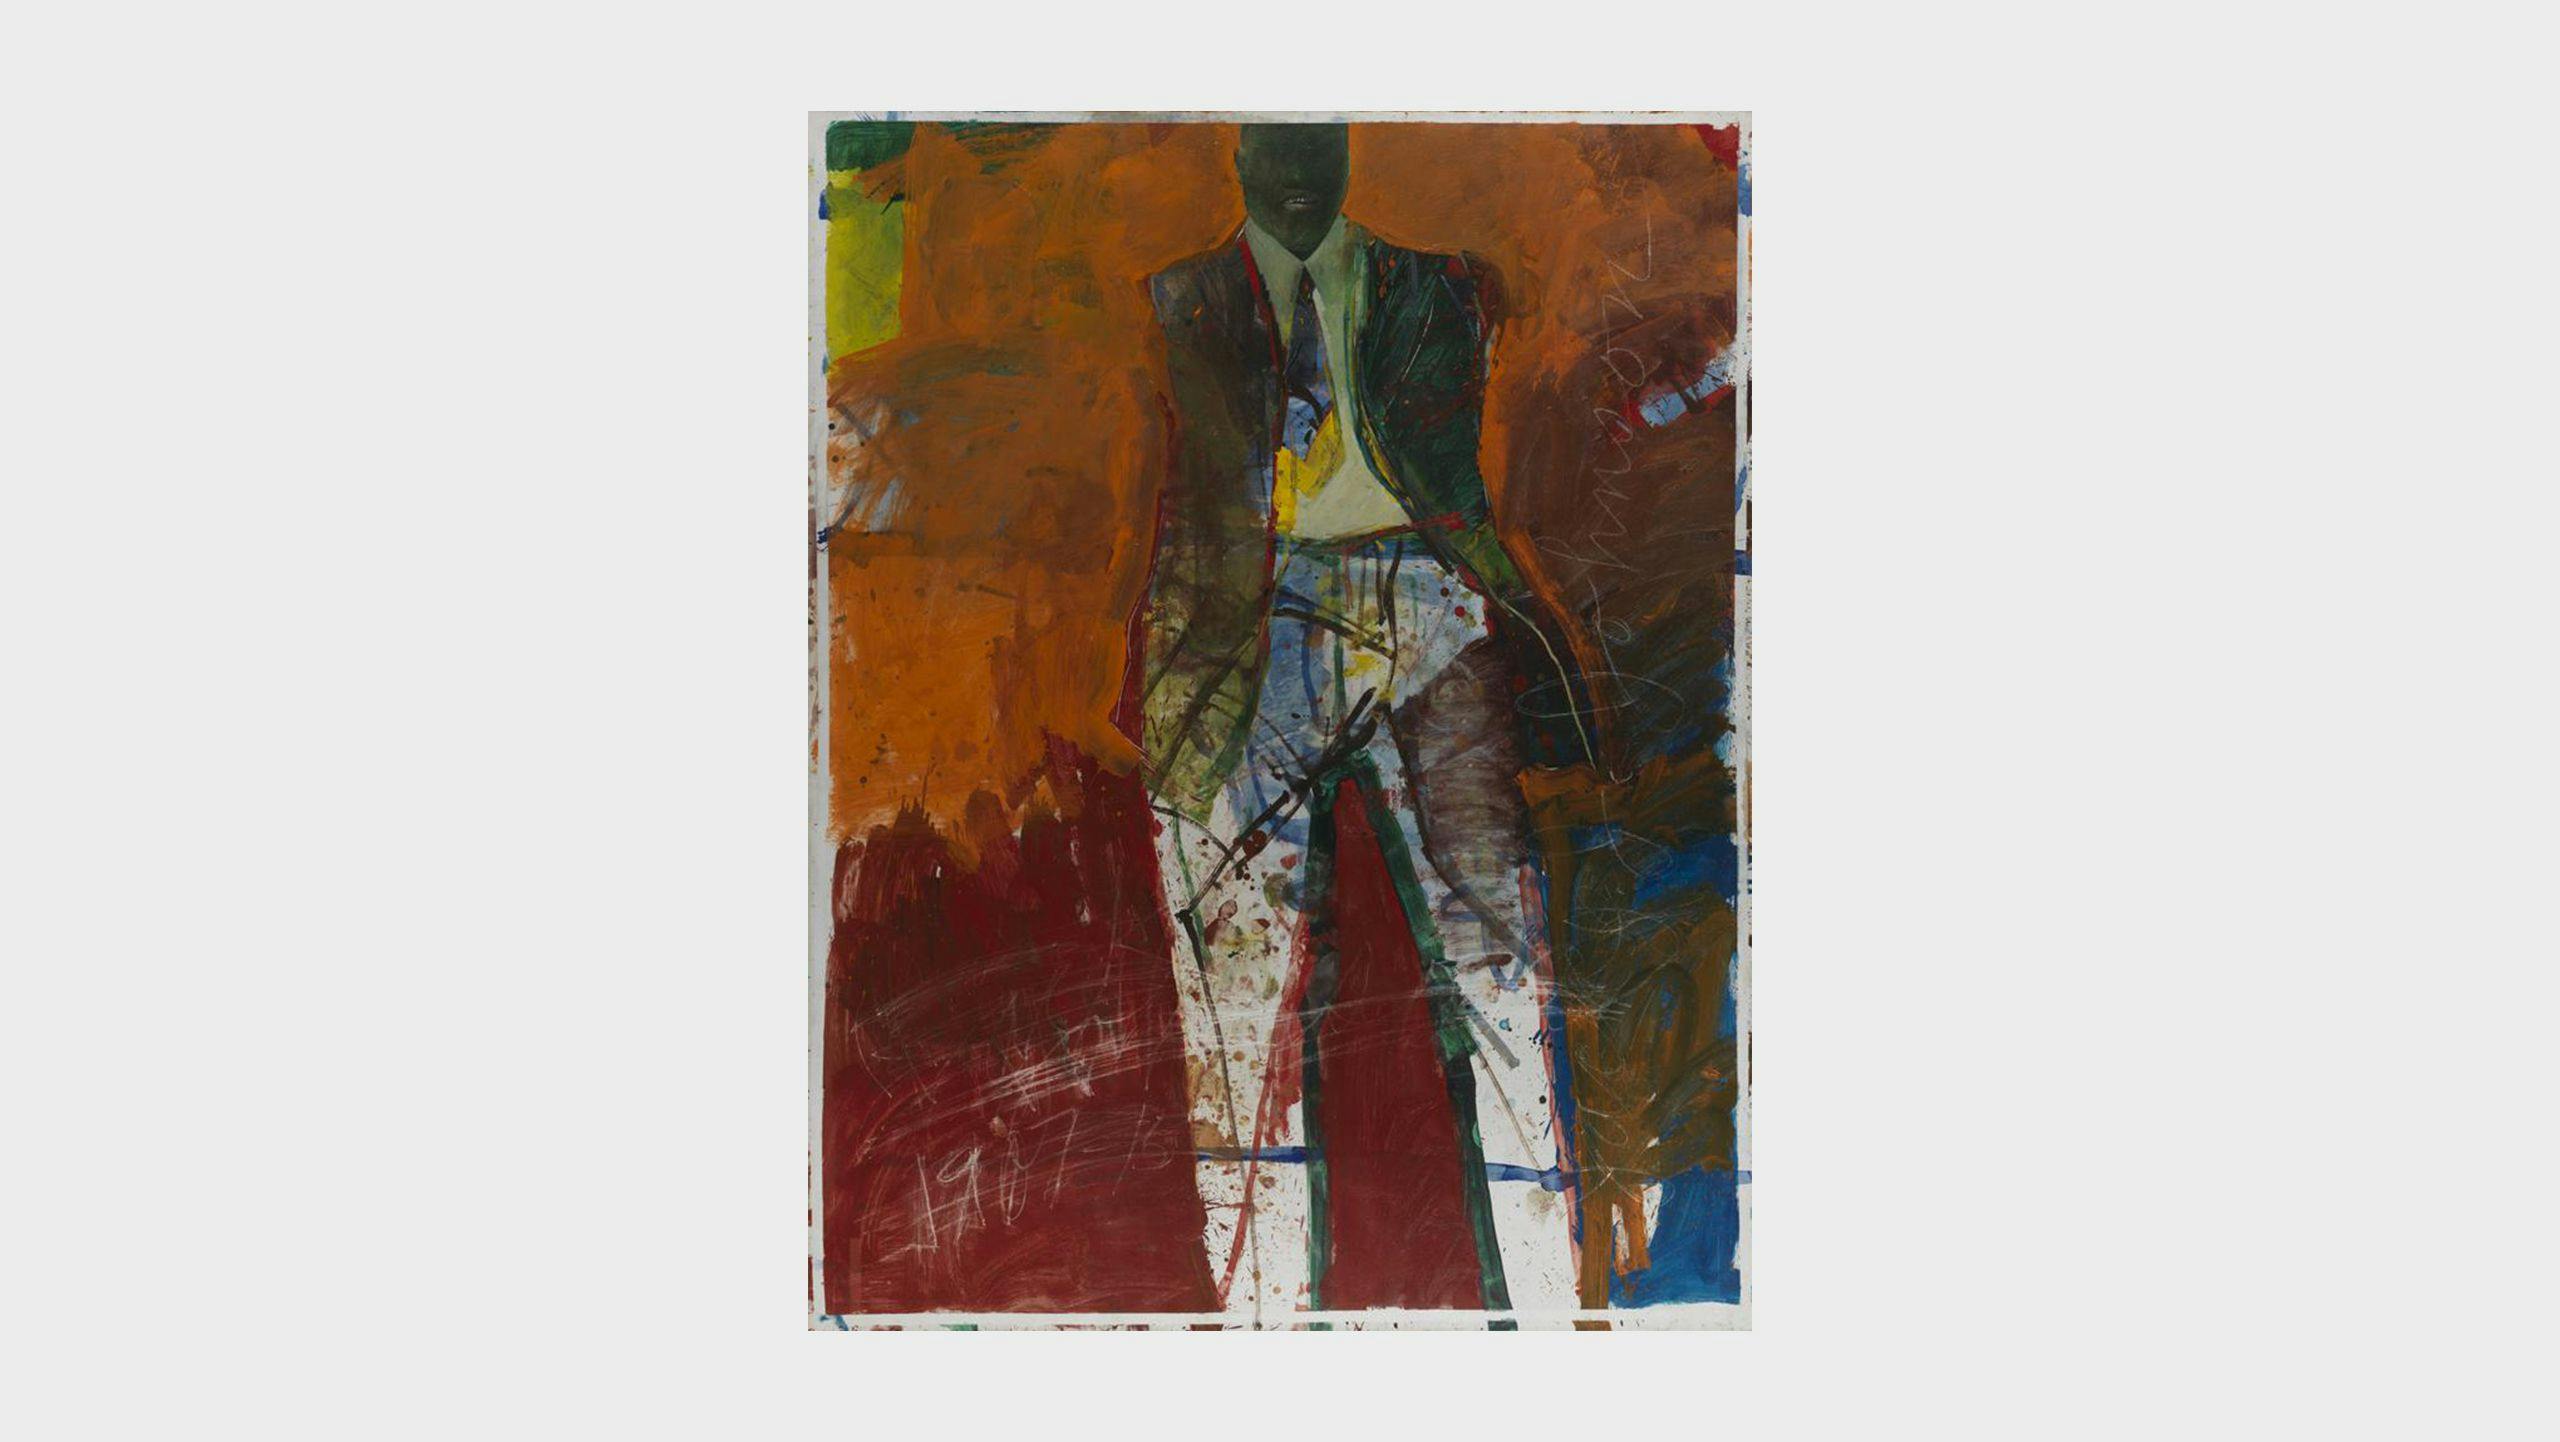 An artwork by Raymond Saunders, titled Jack Johnson, dated 1971. Funds provided by the National Endowment for the Arts, Pennsylvania Academy Women's Committee, and an Anonymous Dono